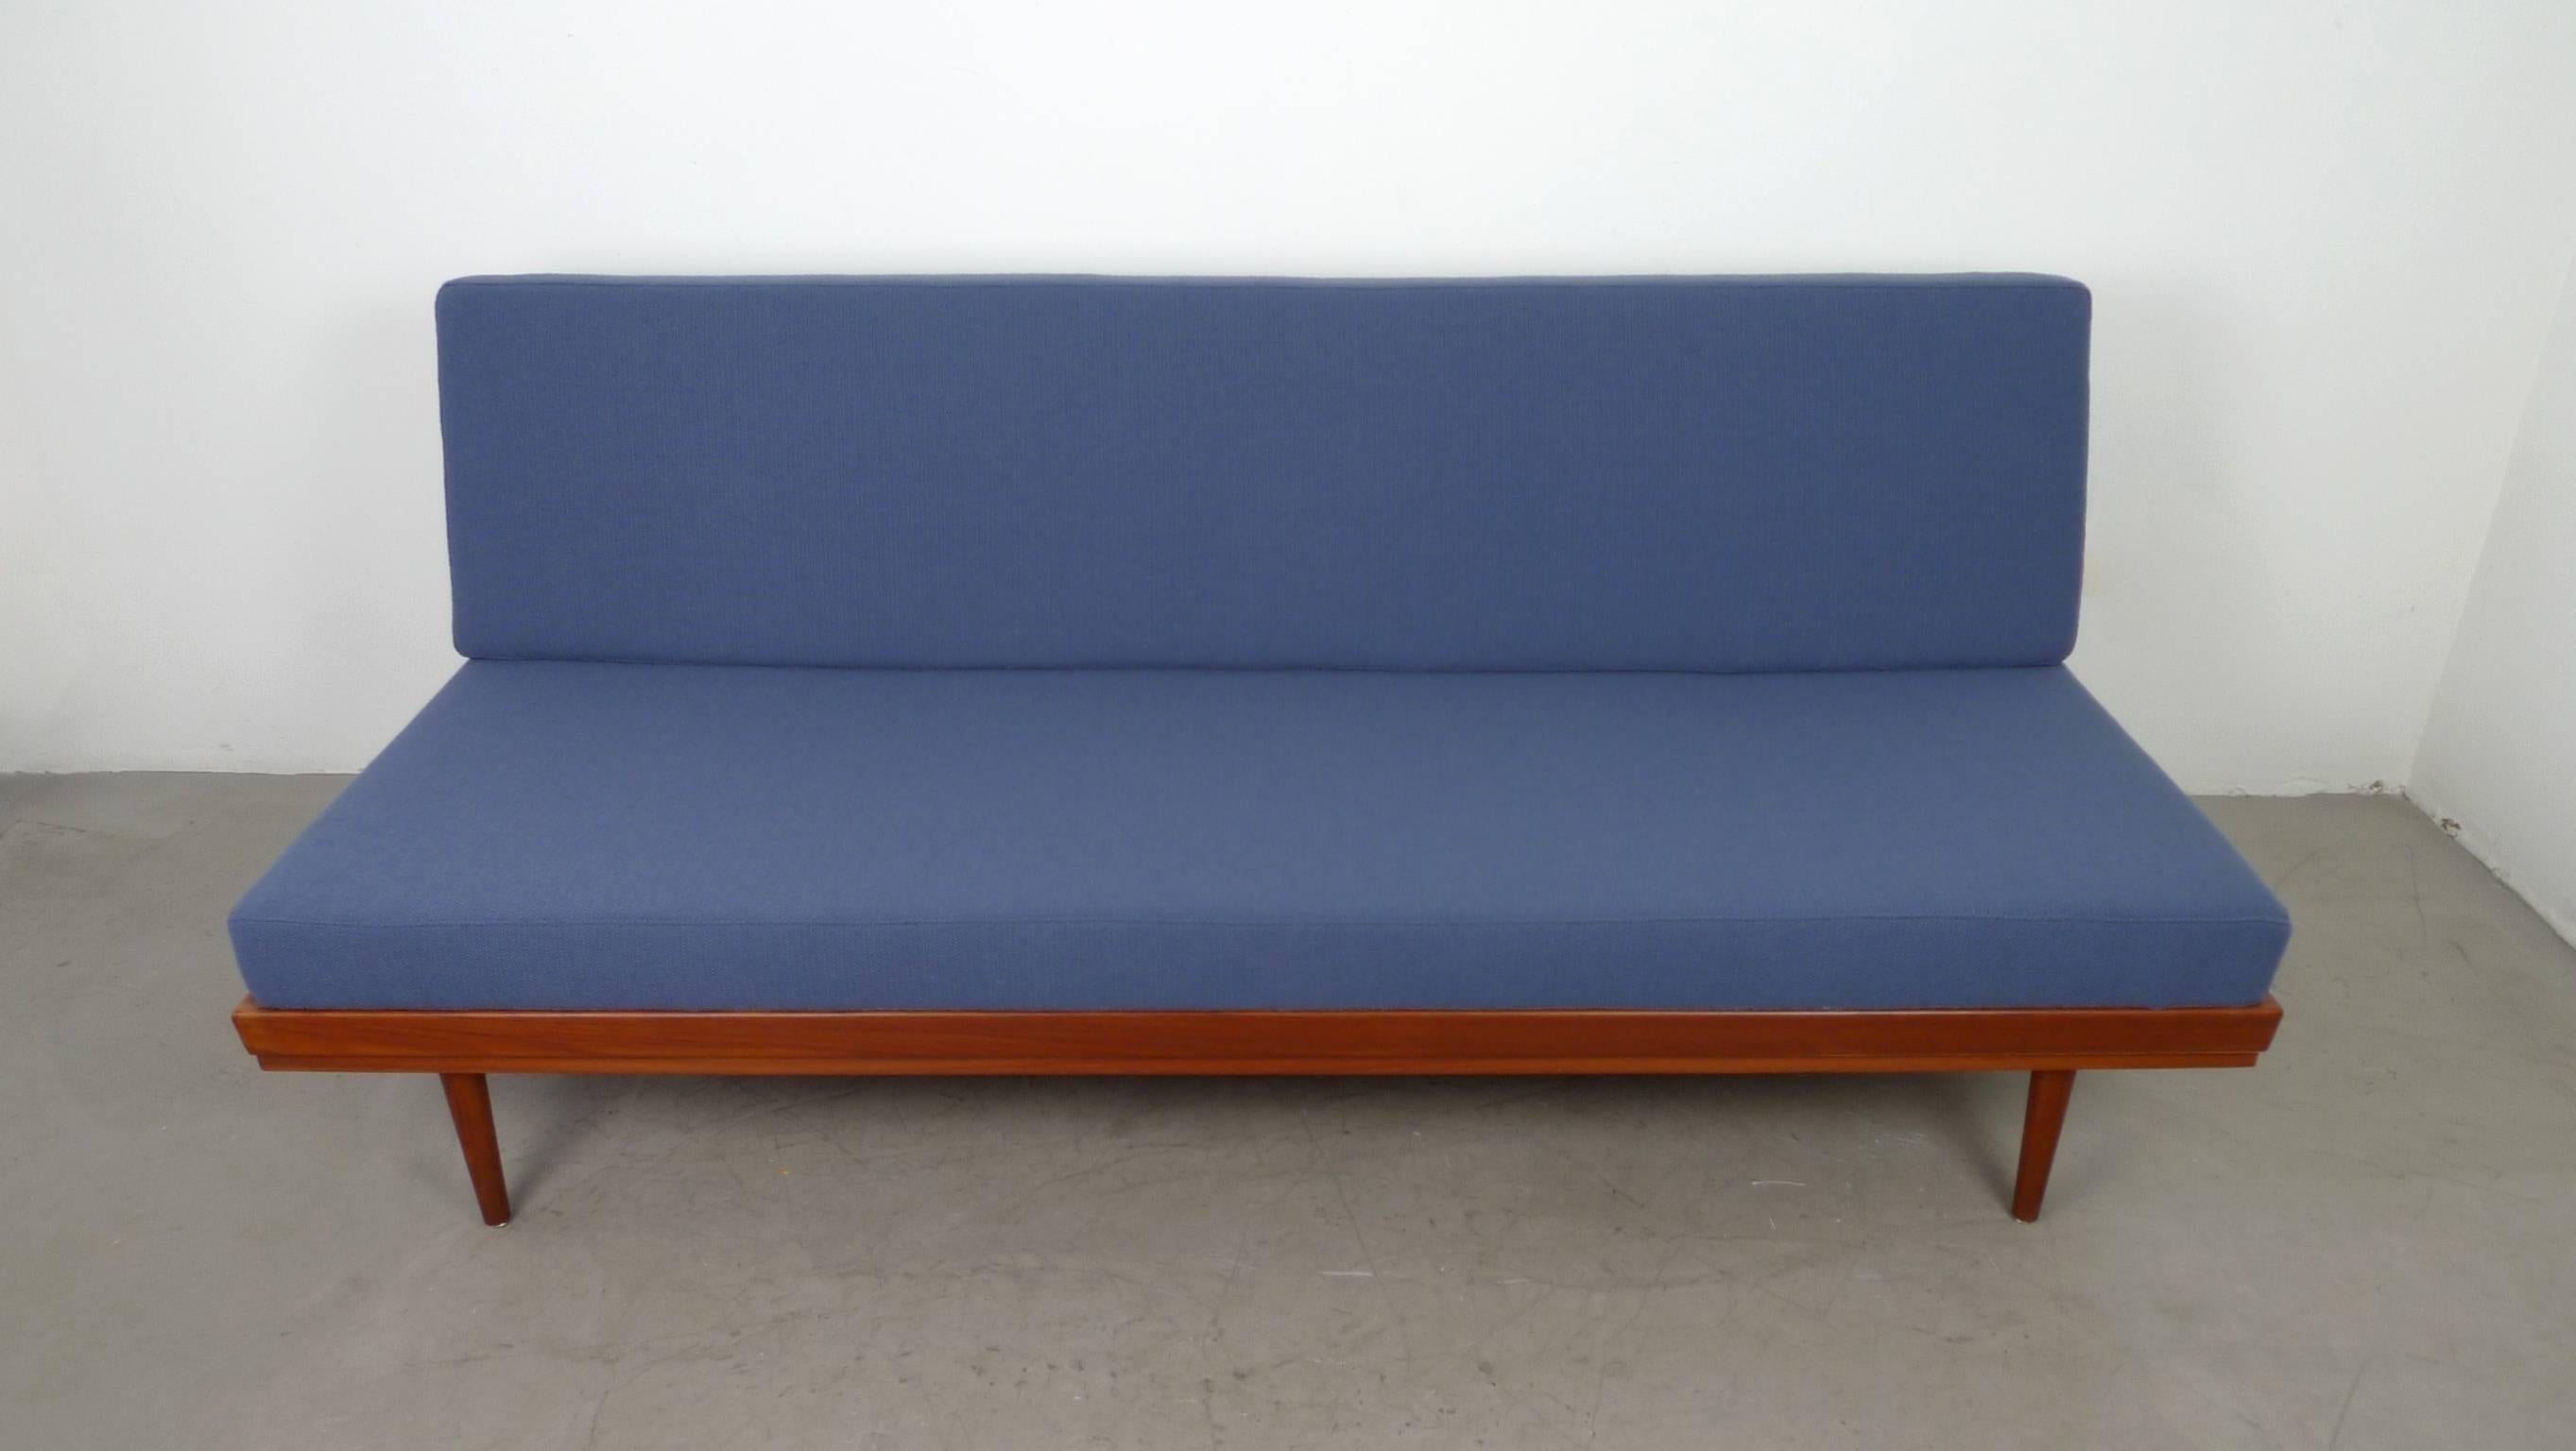 German manufacturer Walter Knoll designed and produced this sofabed in the 1950s. The frame is made of teak and the backrest has metal hinges that allow you to adjust the piece into a bed. To sleep or relax, the back pad can be removed and the back